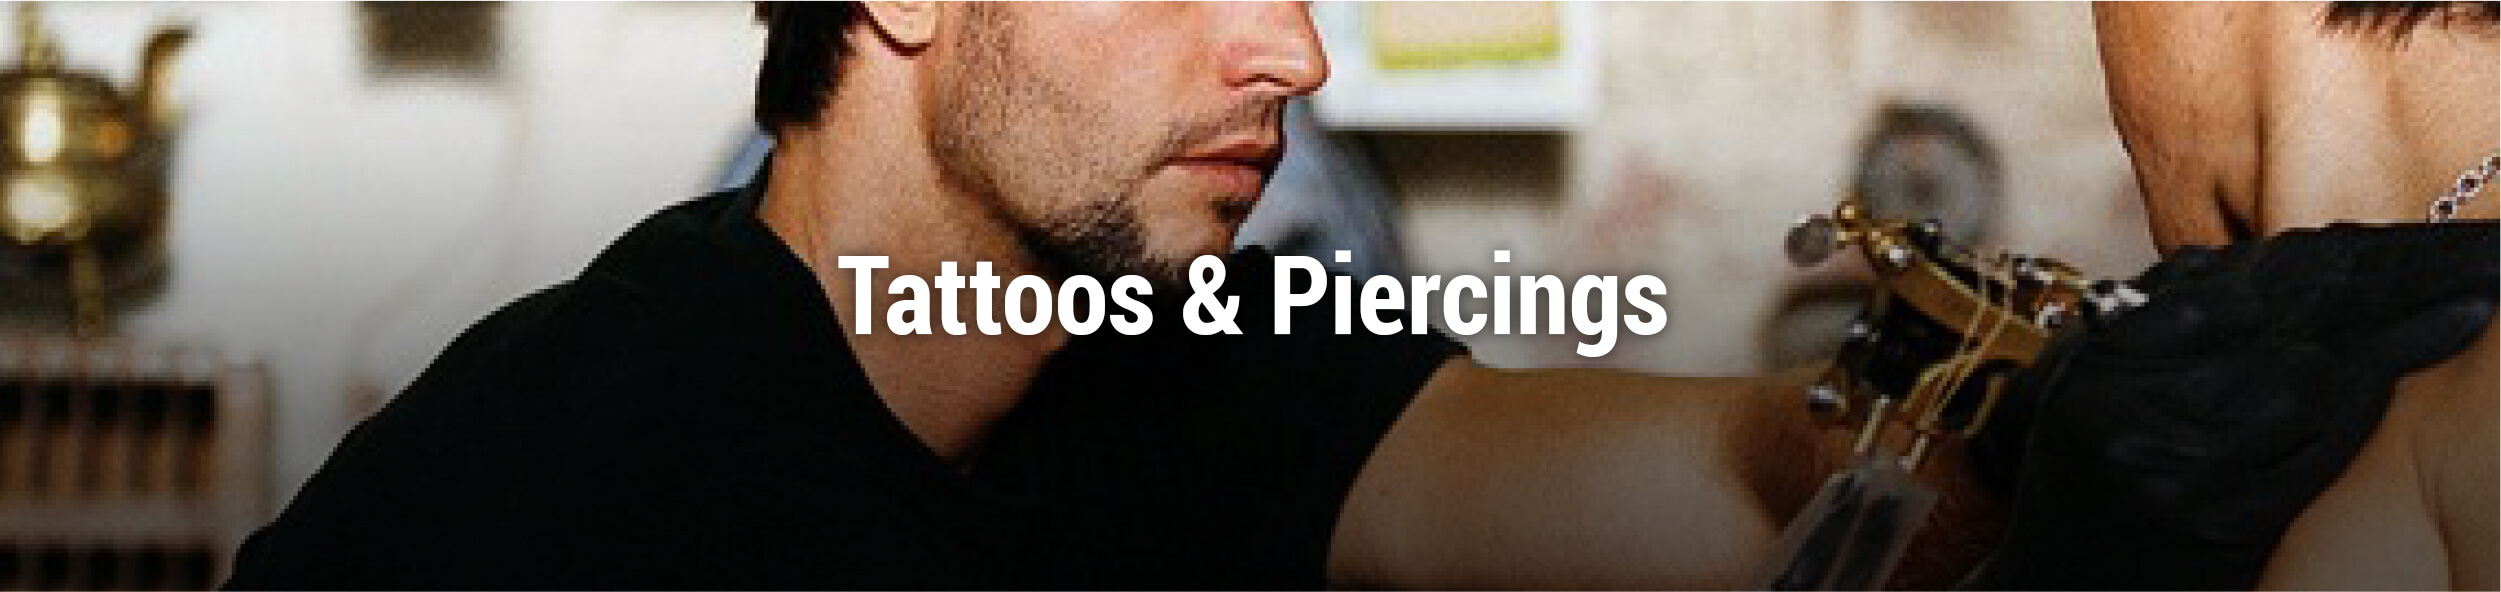 Tattoos and piercings